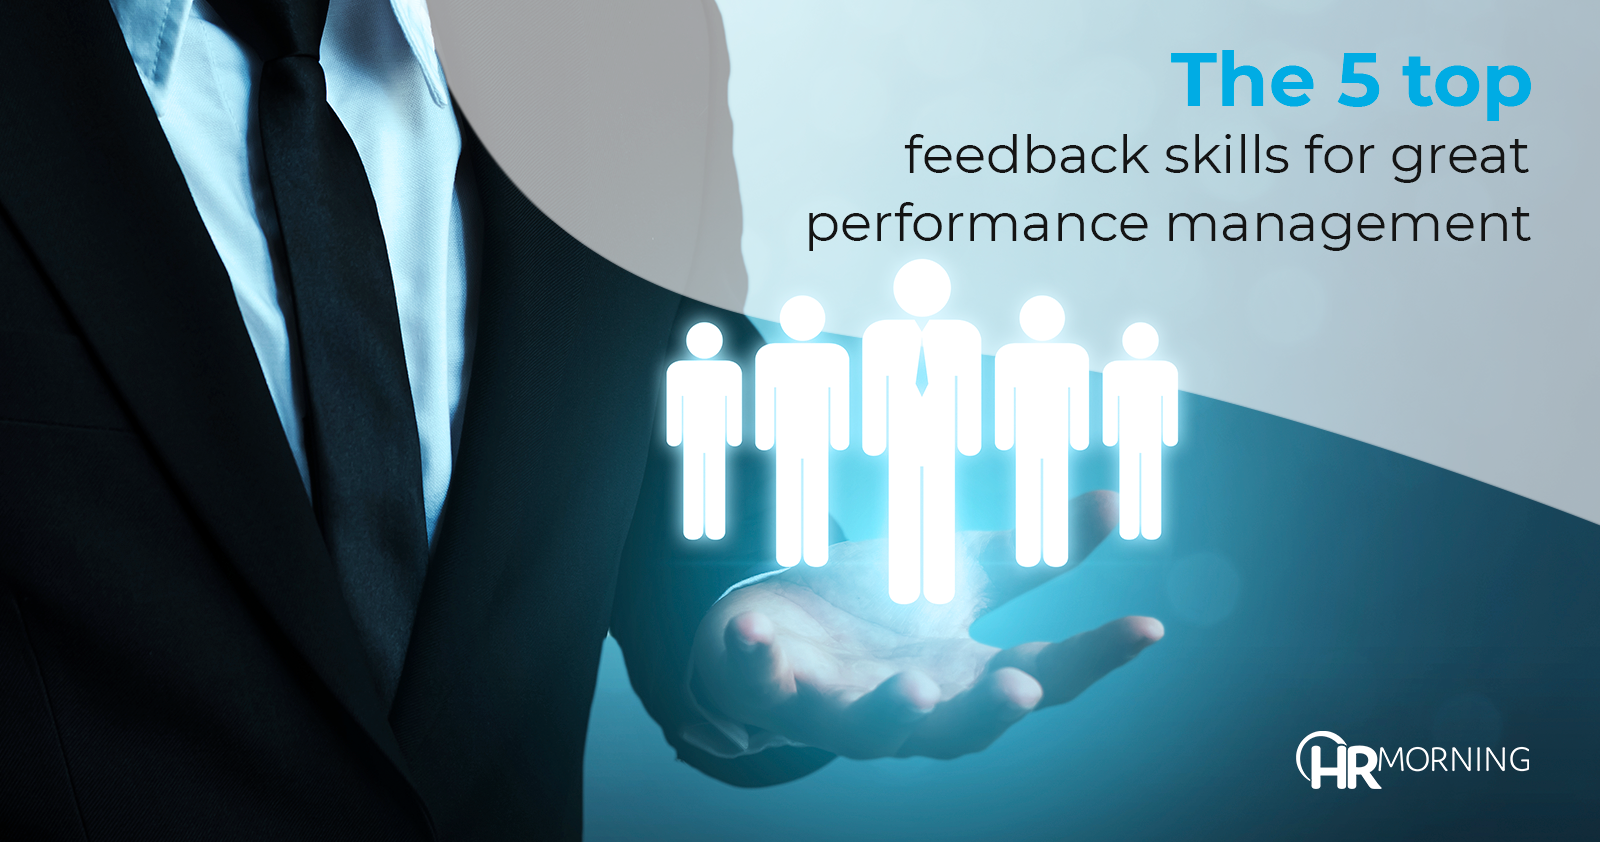 5 top feedback skills for great performance management